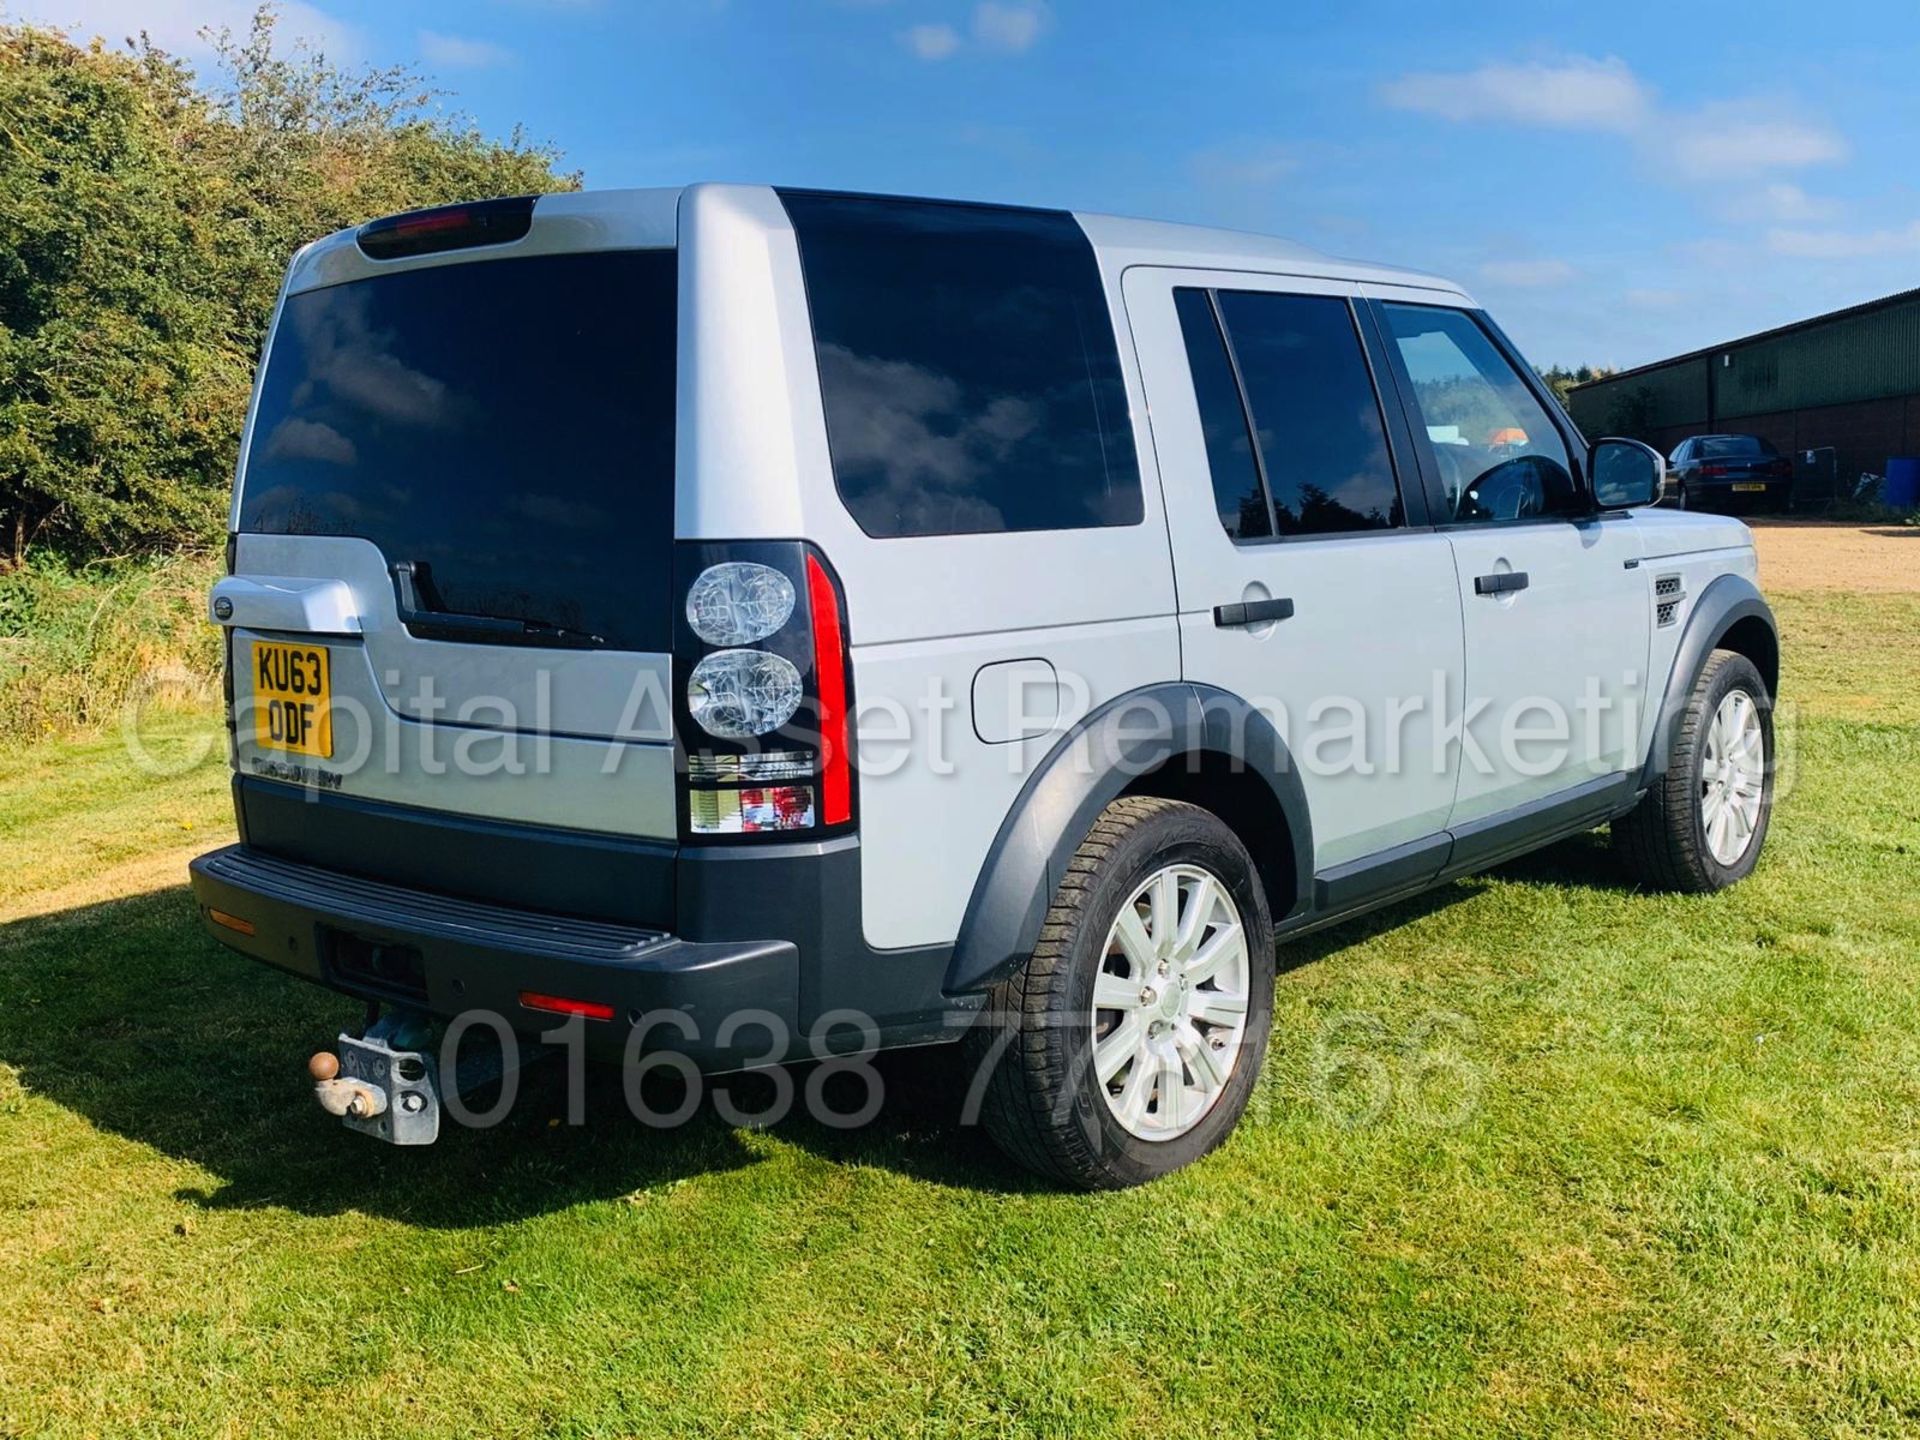 LAND ROVER DISCOVERY *XS EDITION* (2014) '3.0 SDV6 - 255 BHP - 8 SPEED AUTO' *LEATHER & SAT NAV* - Image 15 of 50